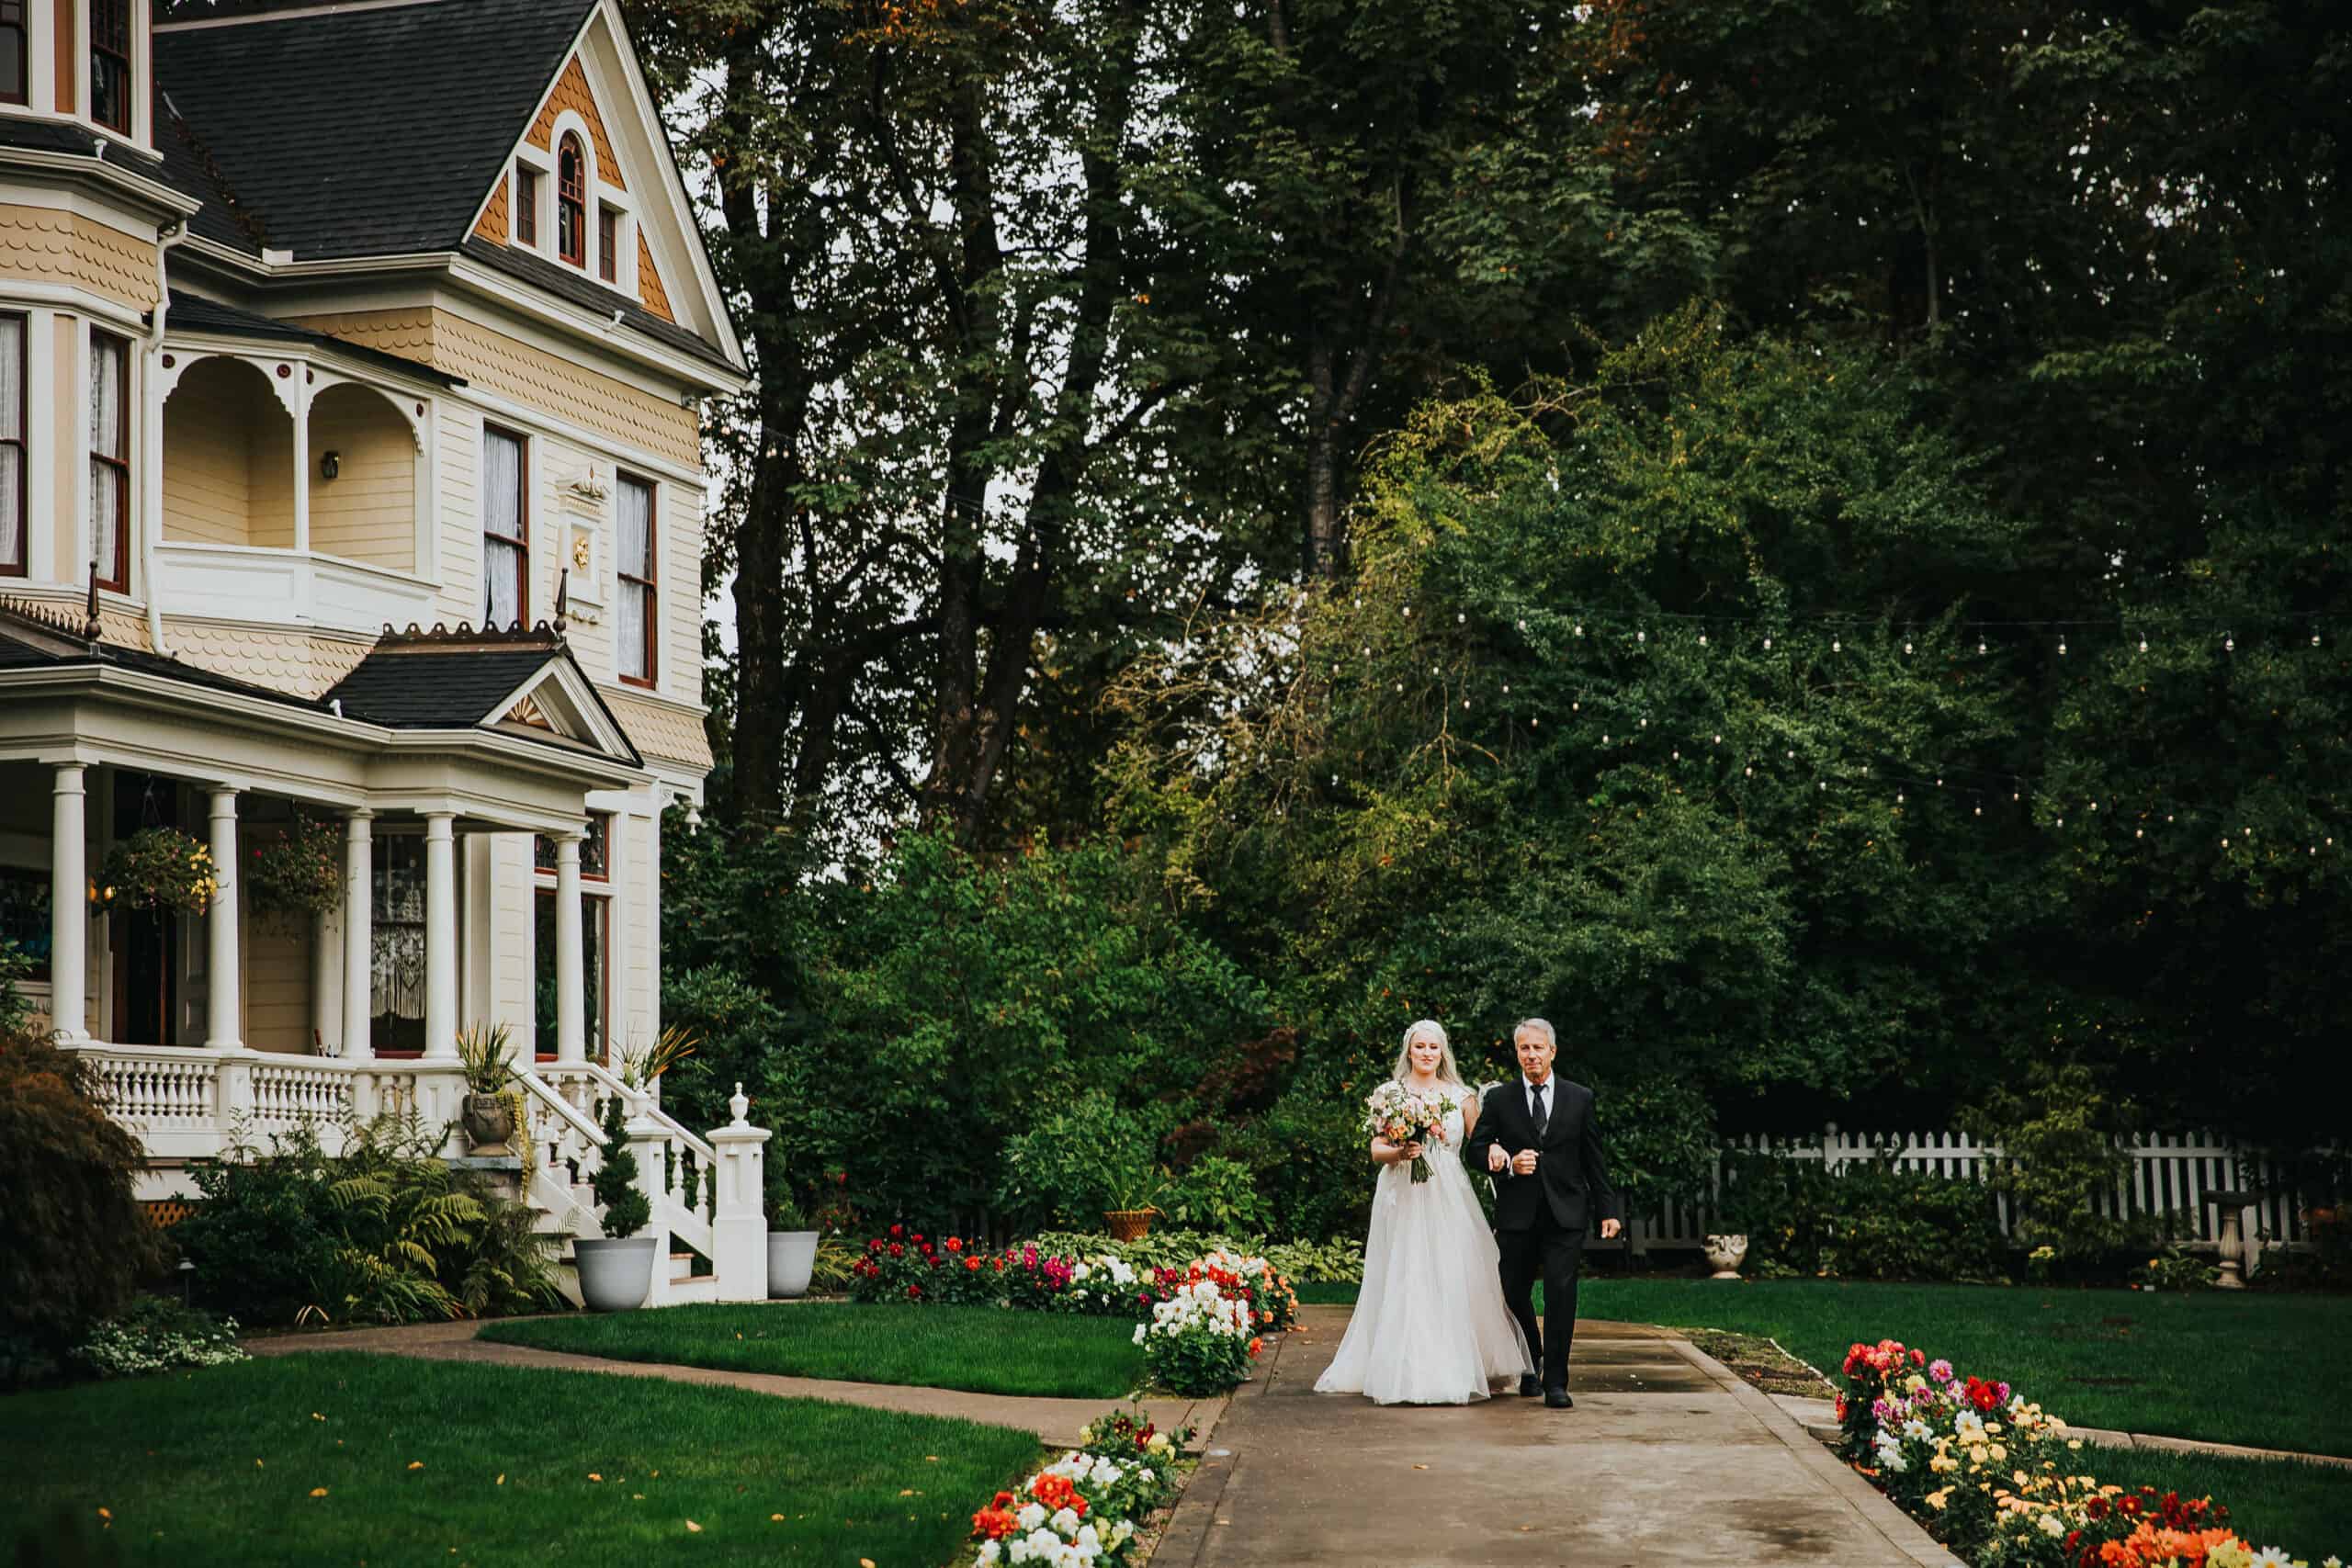 A bride and her father walk down a path away from an ornate Victorian Mansion